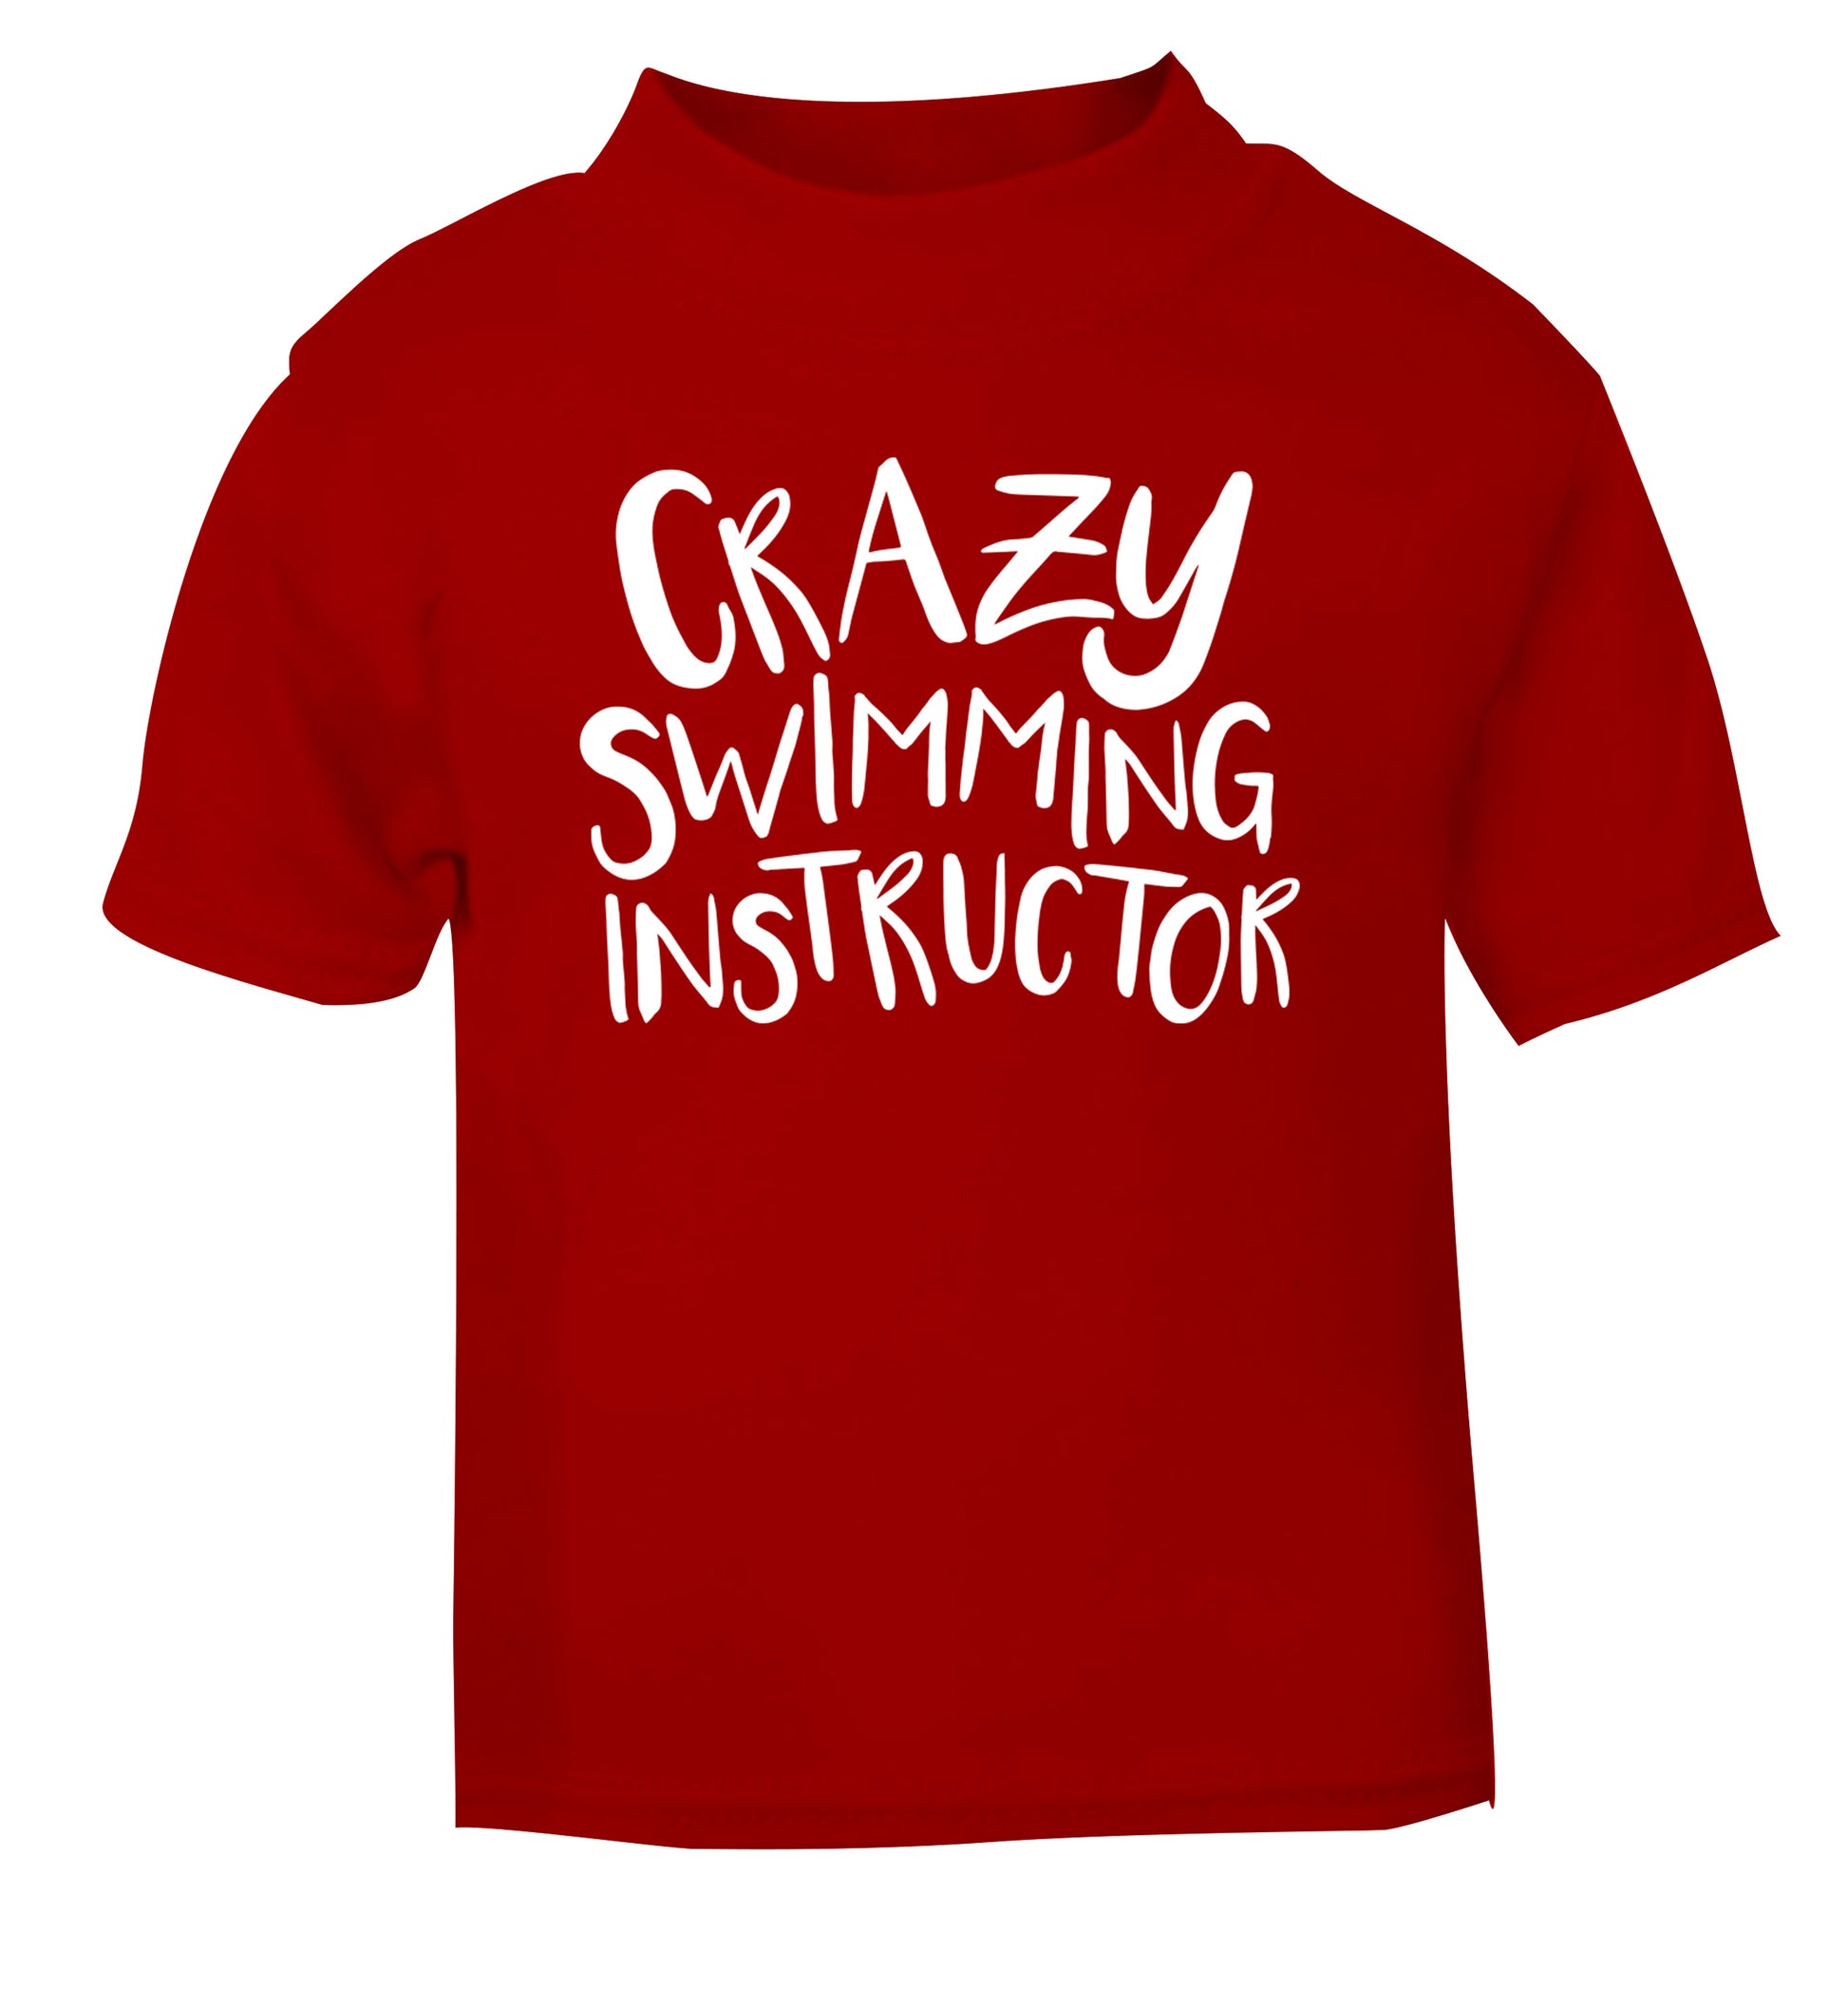 Crazy swimming instructor red Baby Toddler Tshirt 2 Years